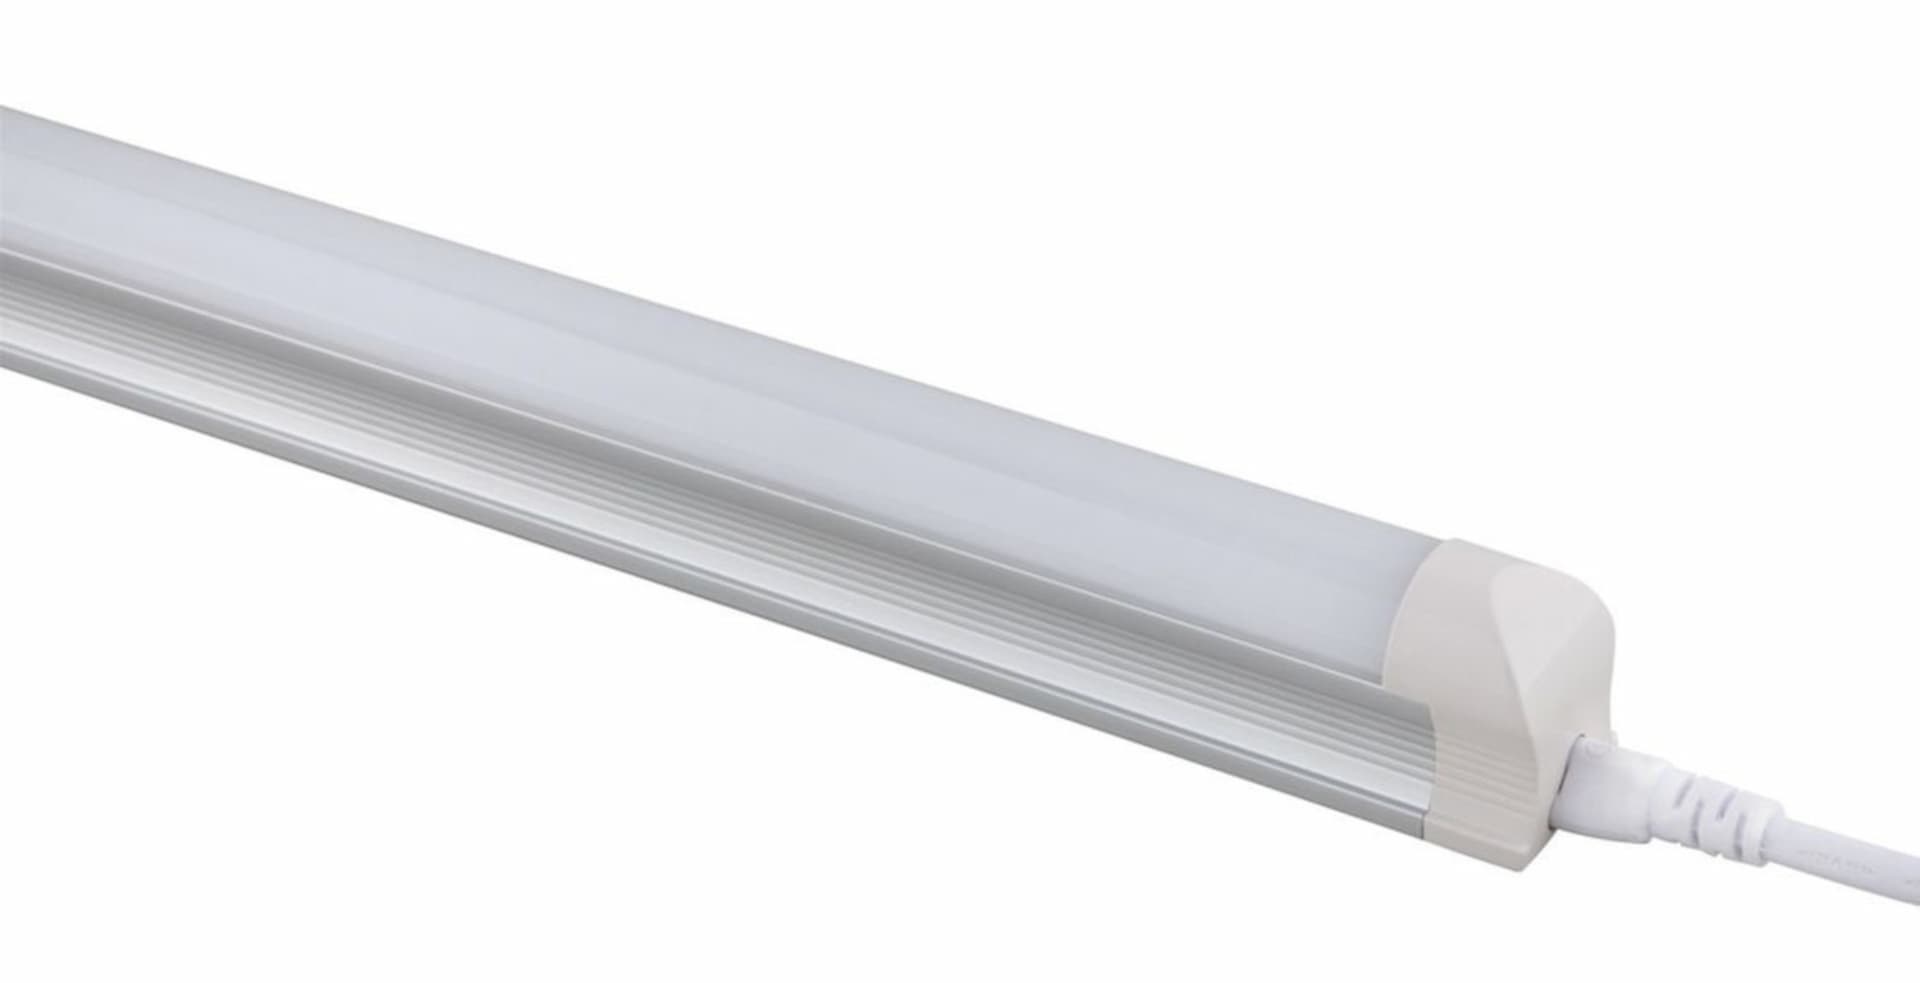 LED tube fluorescent replacement